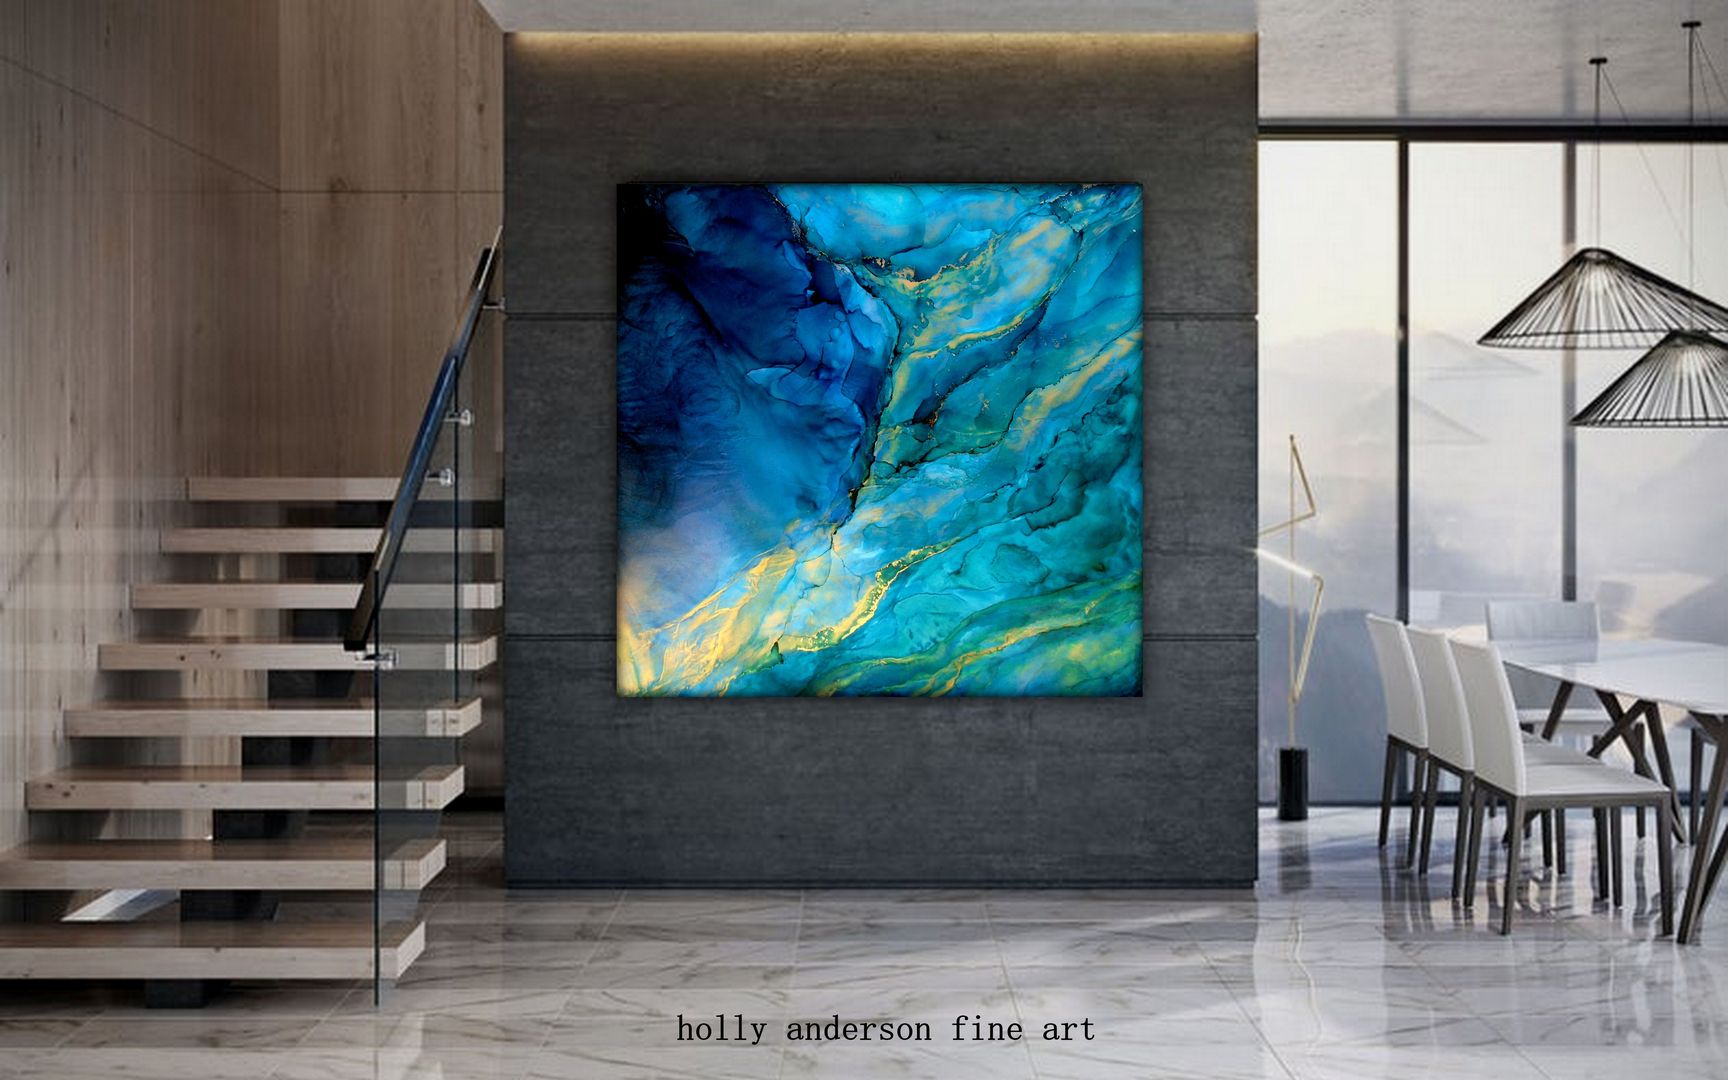 Original Large Alcohol Ink Art Fluid Painting Blue, Green, Gold colors, Abstract Art, Underwater Painting, modern art GLACIRI Holly Anderson Fine Art Modern living room